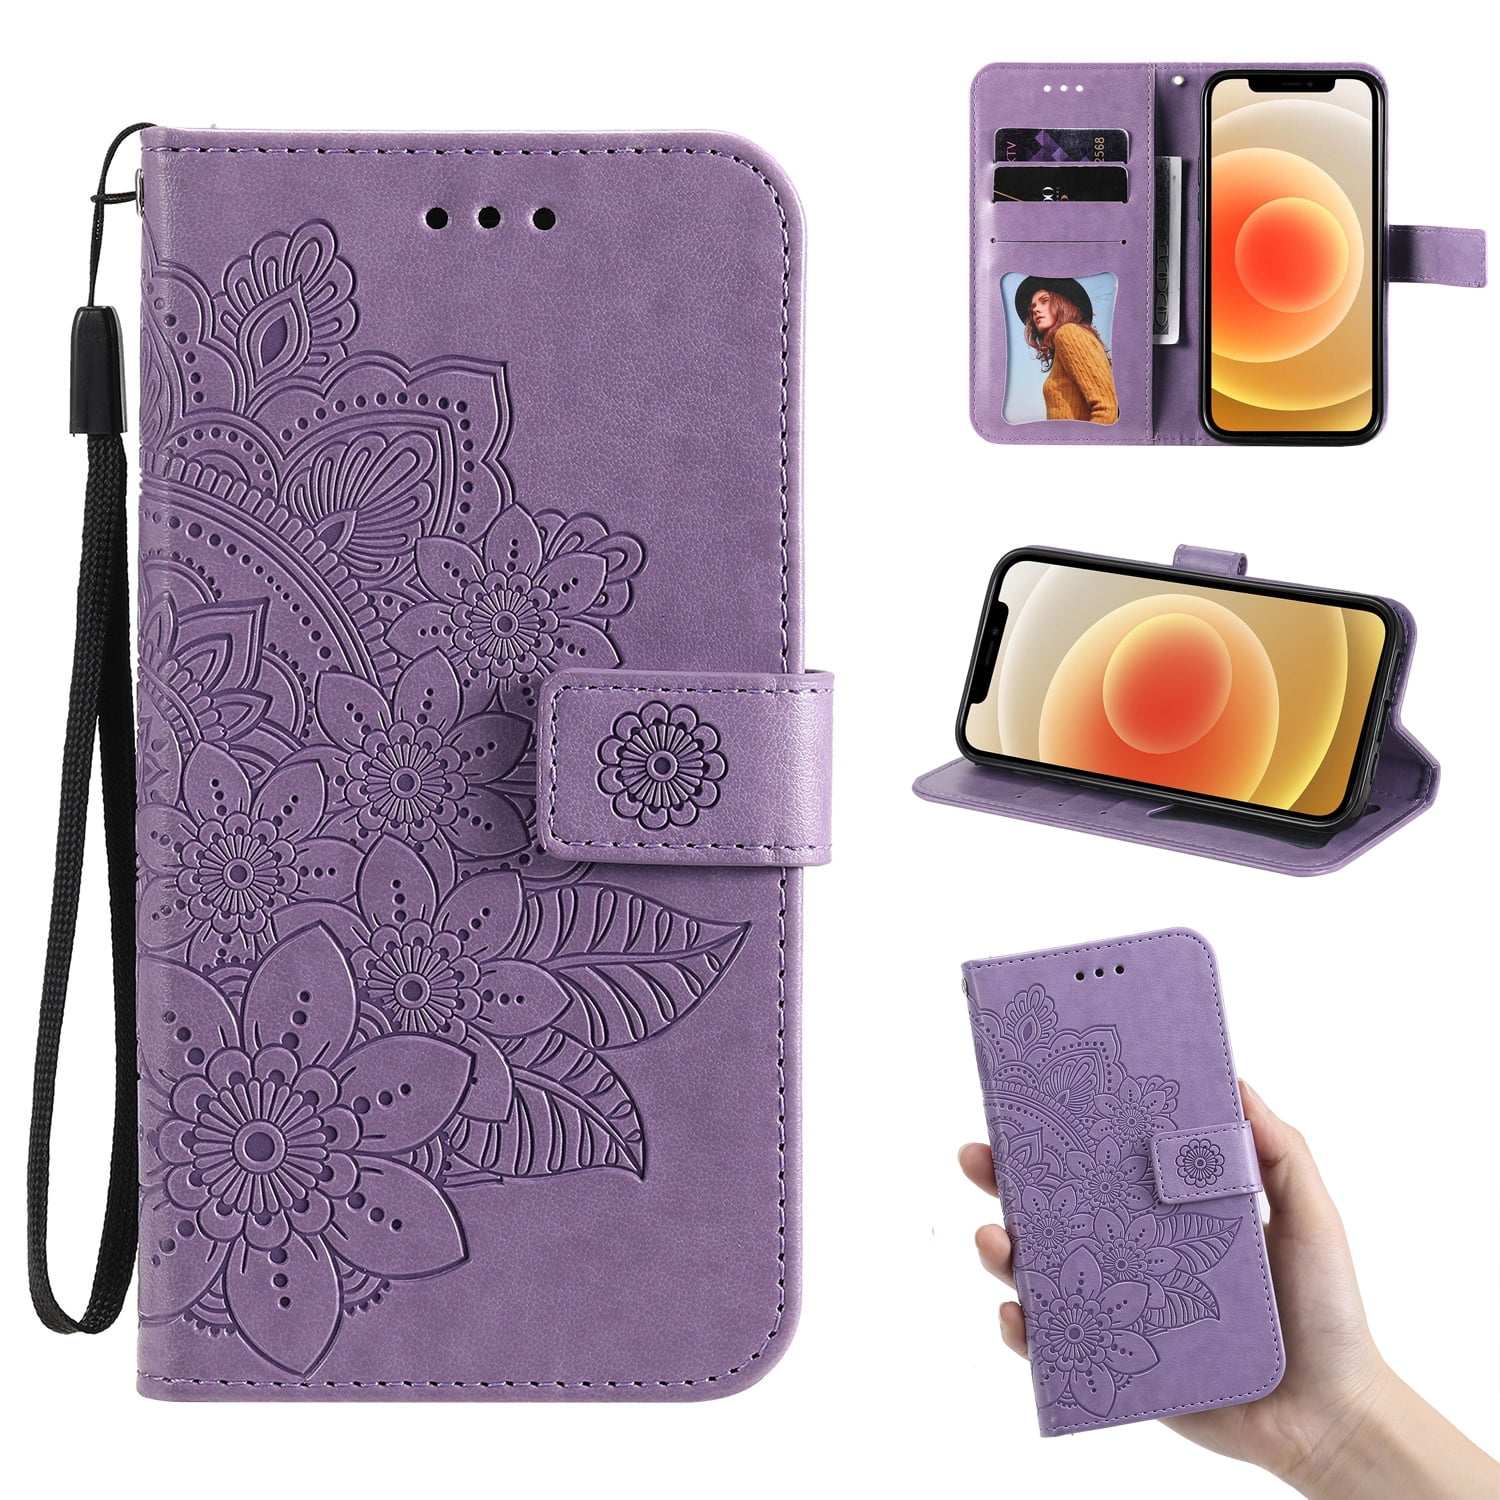 iPhone 6s Purple GORASS case for Apple iPhone 6 iPhone 6s PU Leather Wallet Case Flip Cover with Kickstand Card Holder Card Slots Compatible with iPhone 6 